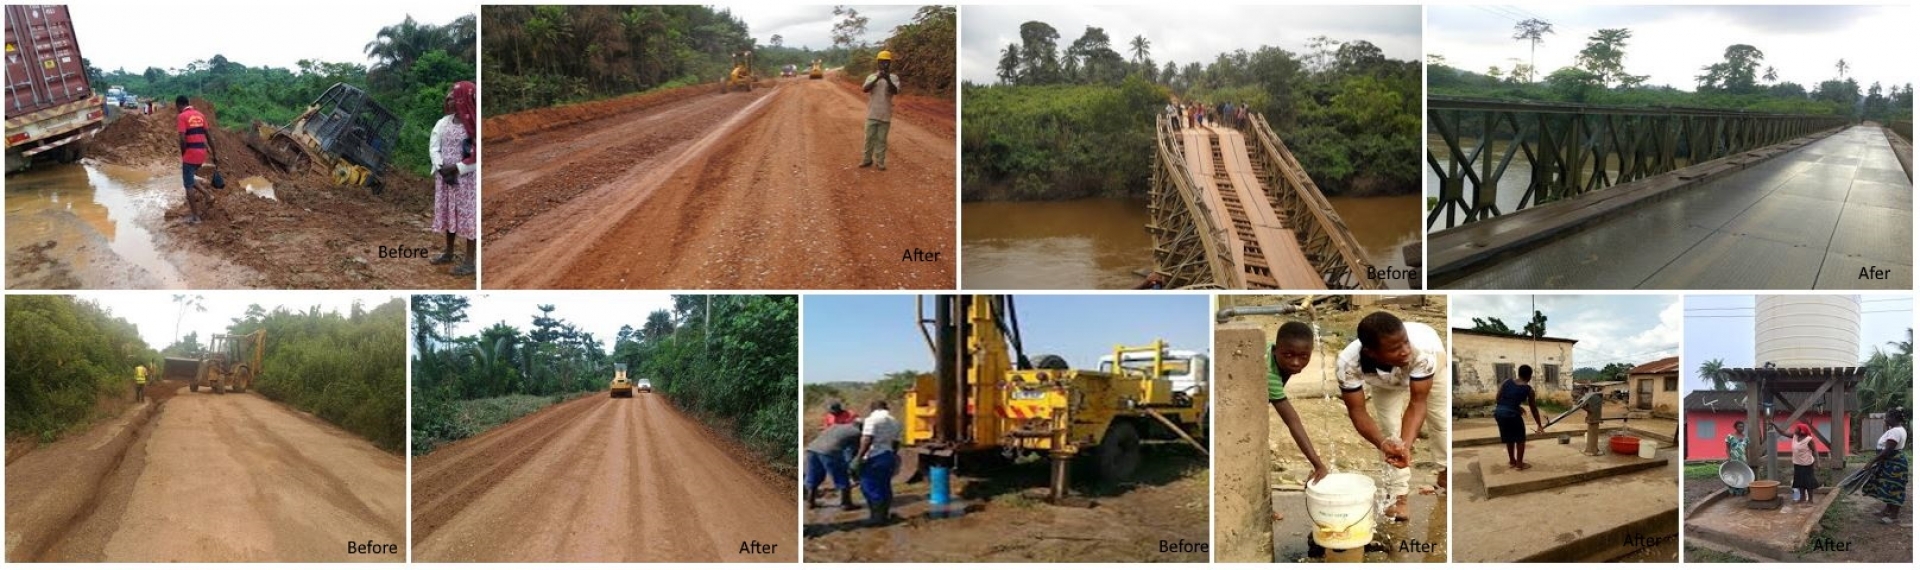 OPERATIONAL AND PUBLIC ROADS CONSTRUCTION AND MAINTENANCE